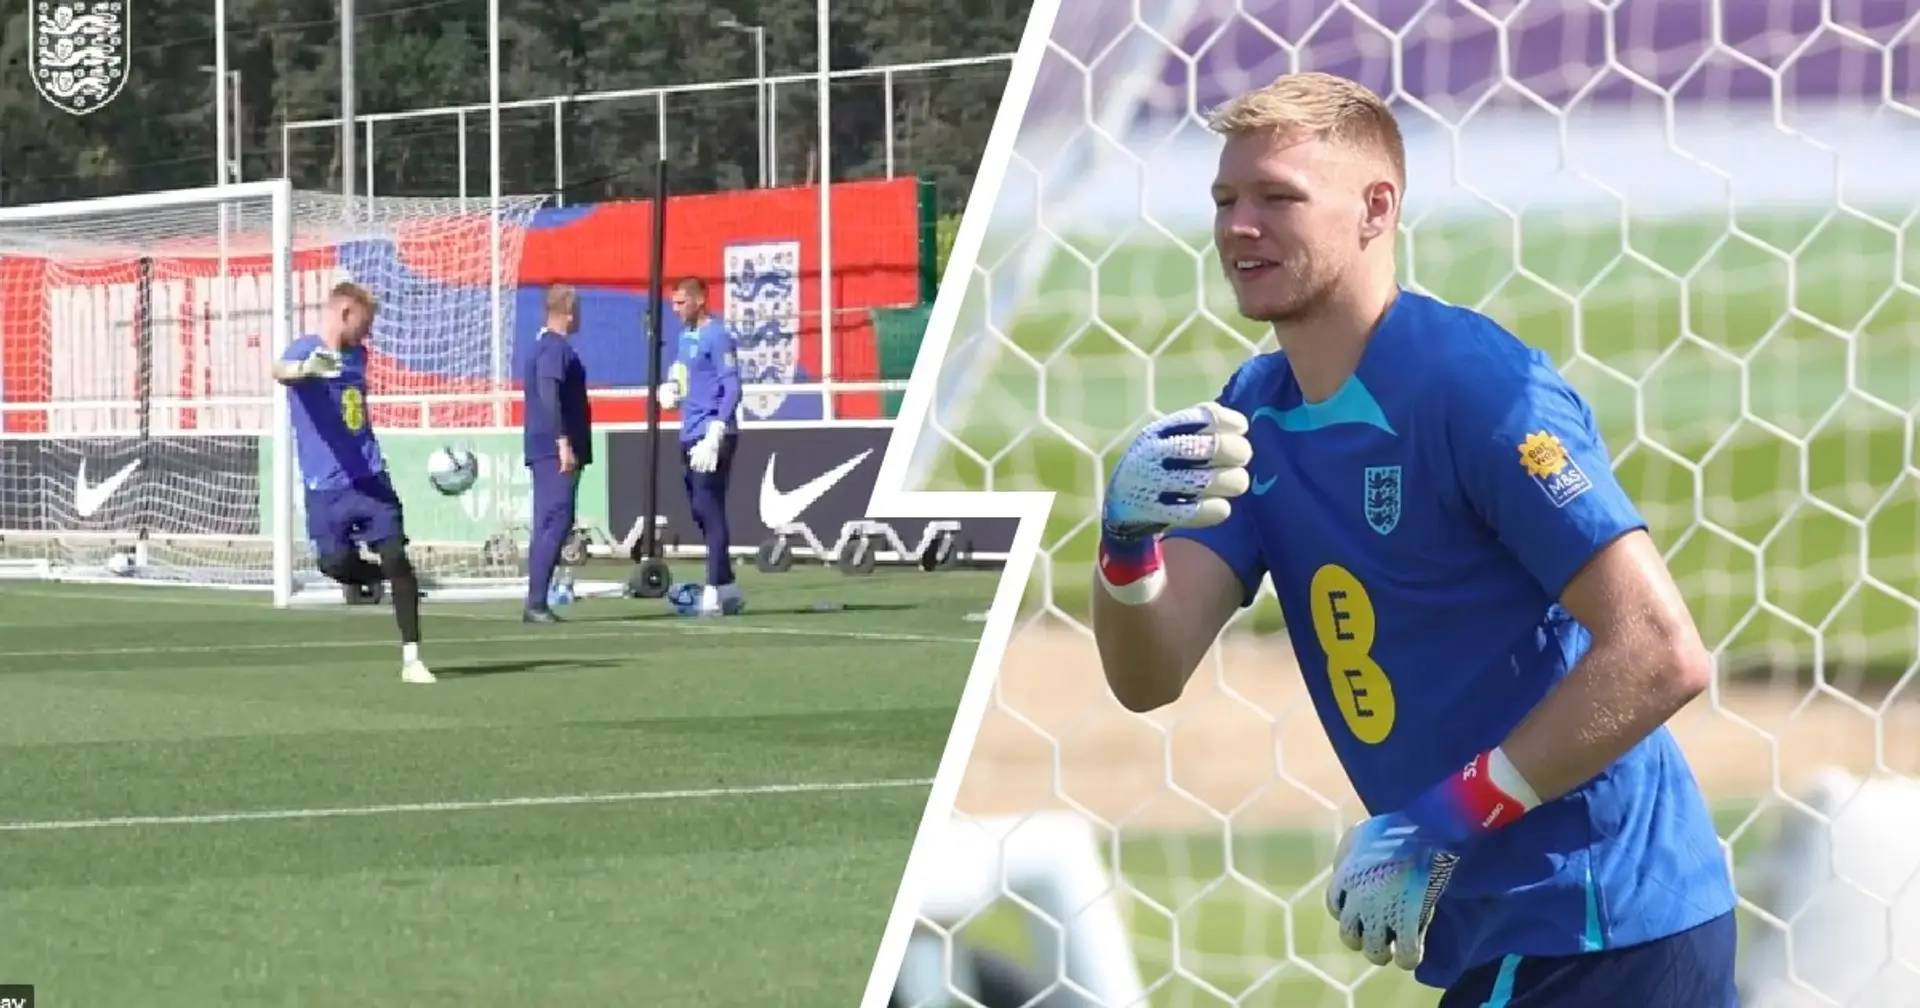 VIDEO: Trending Aaron Ramsdale's incredible skill in England training